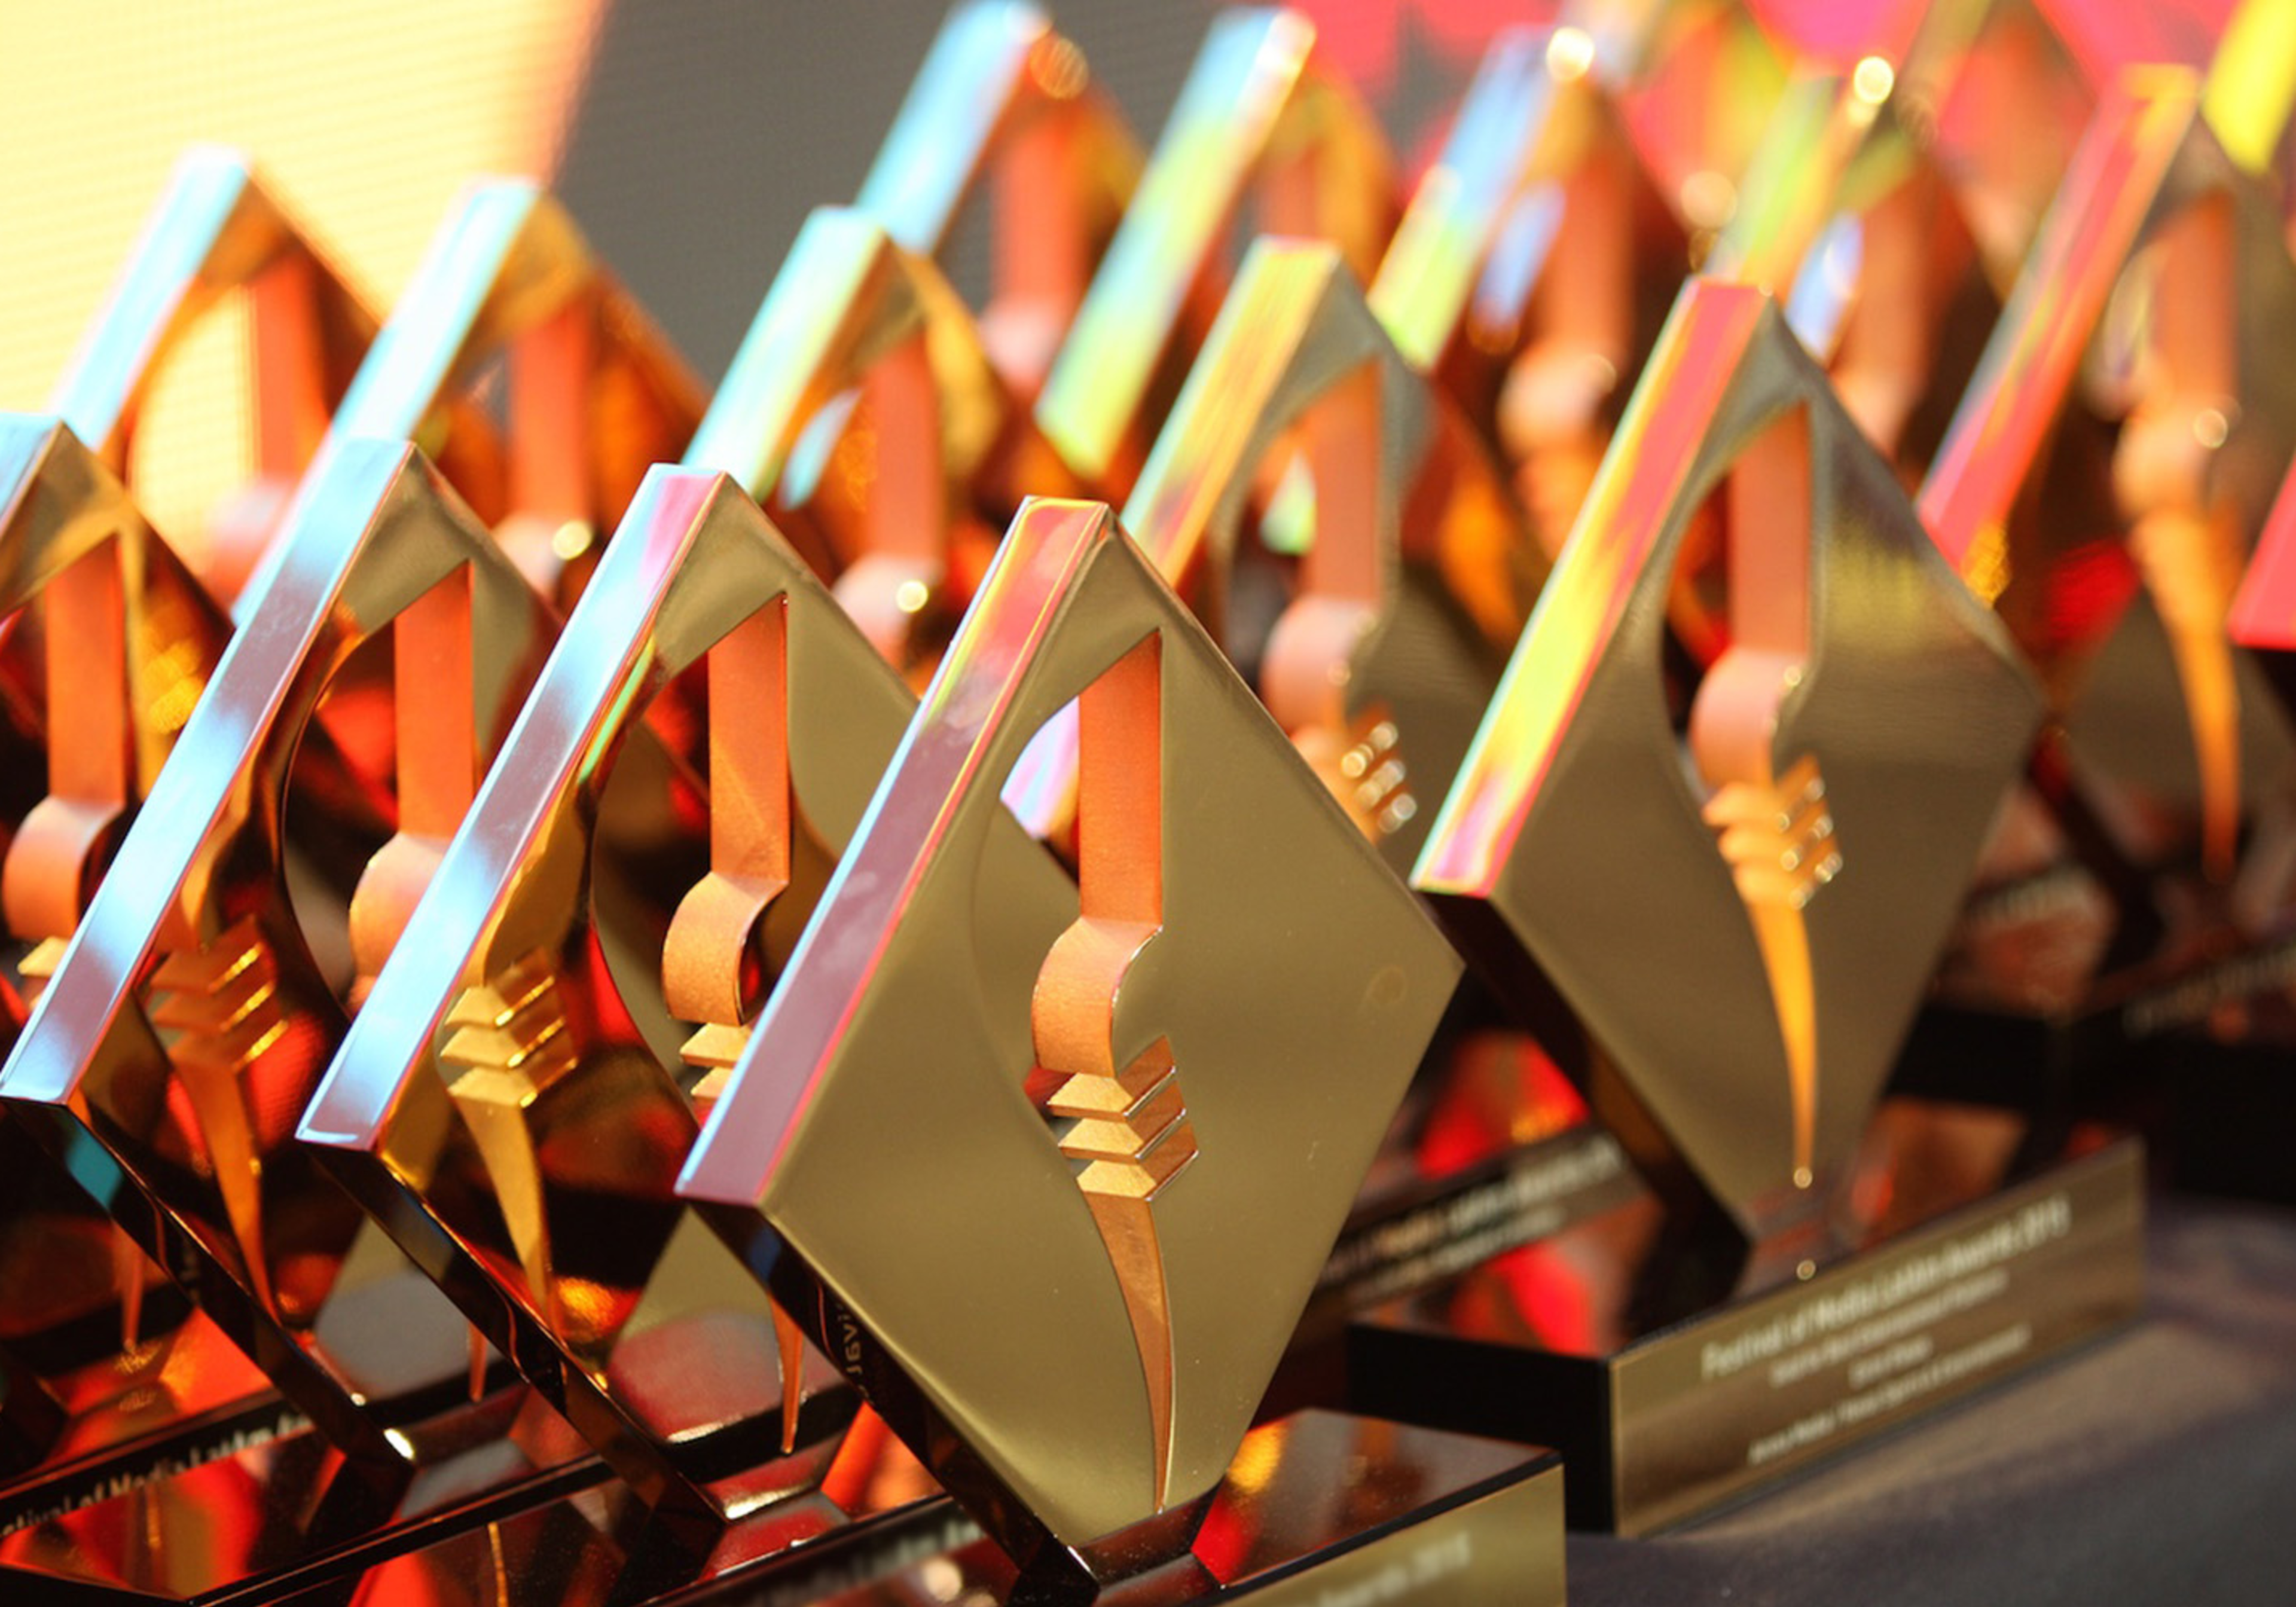 Rows of festival of media awards on a table 